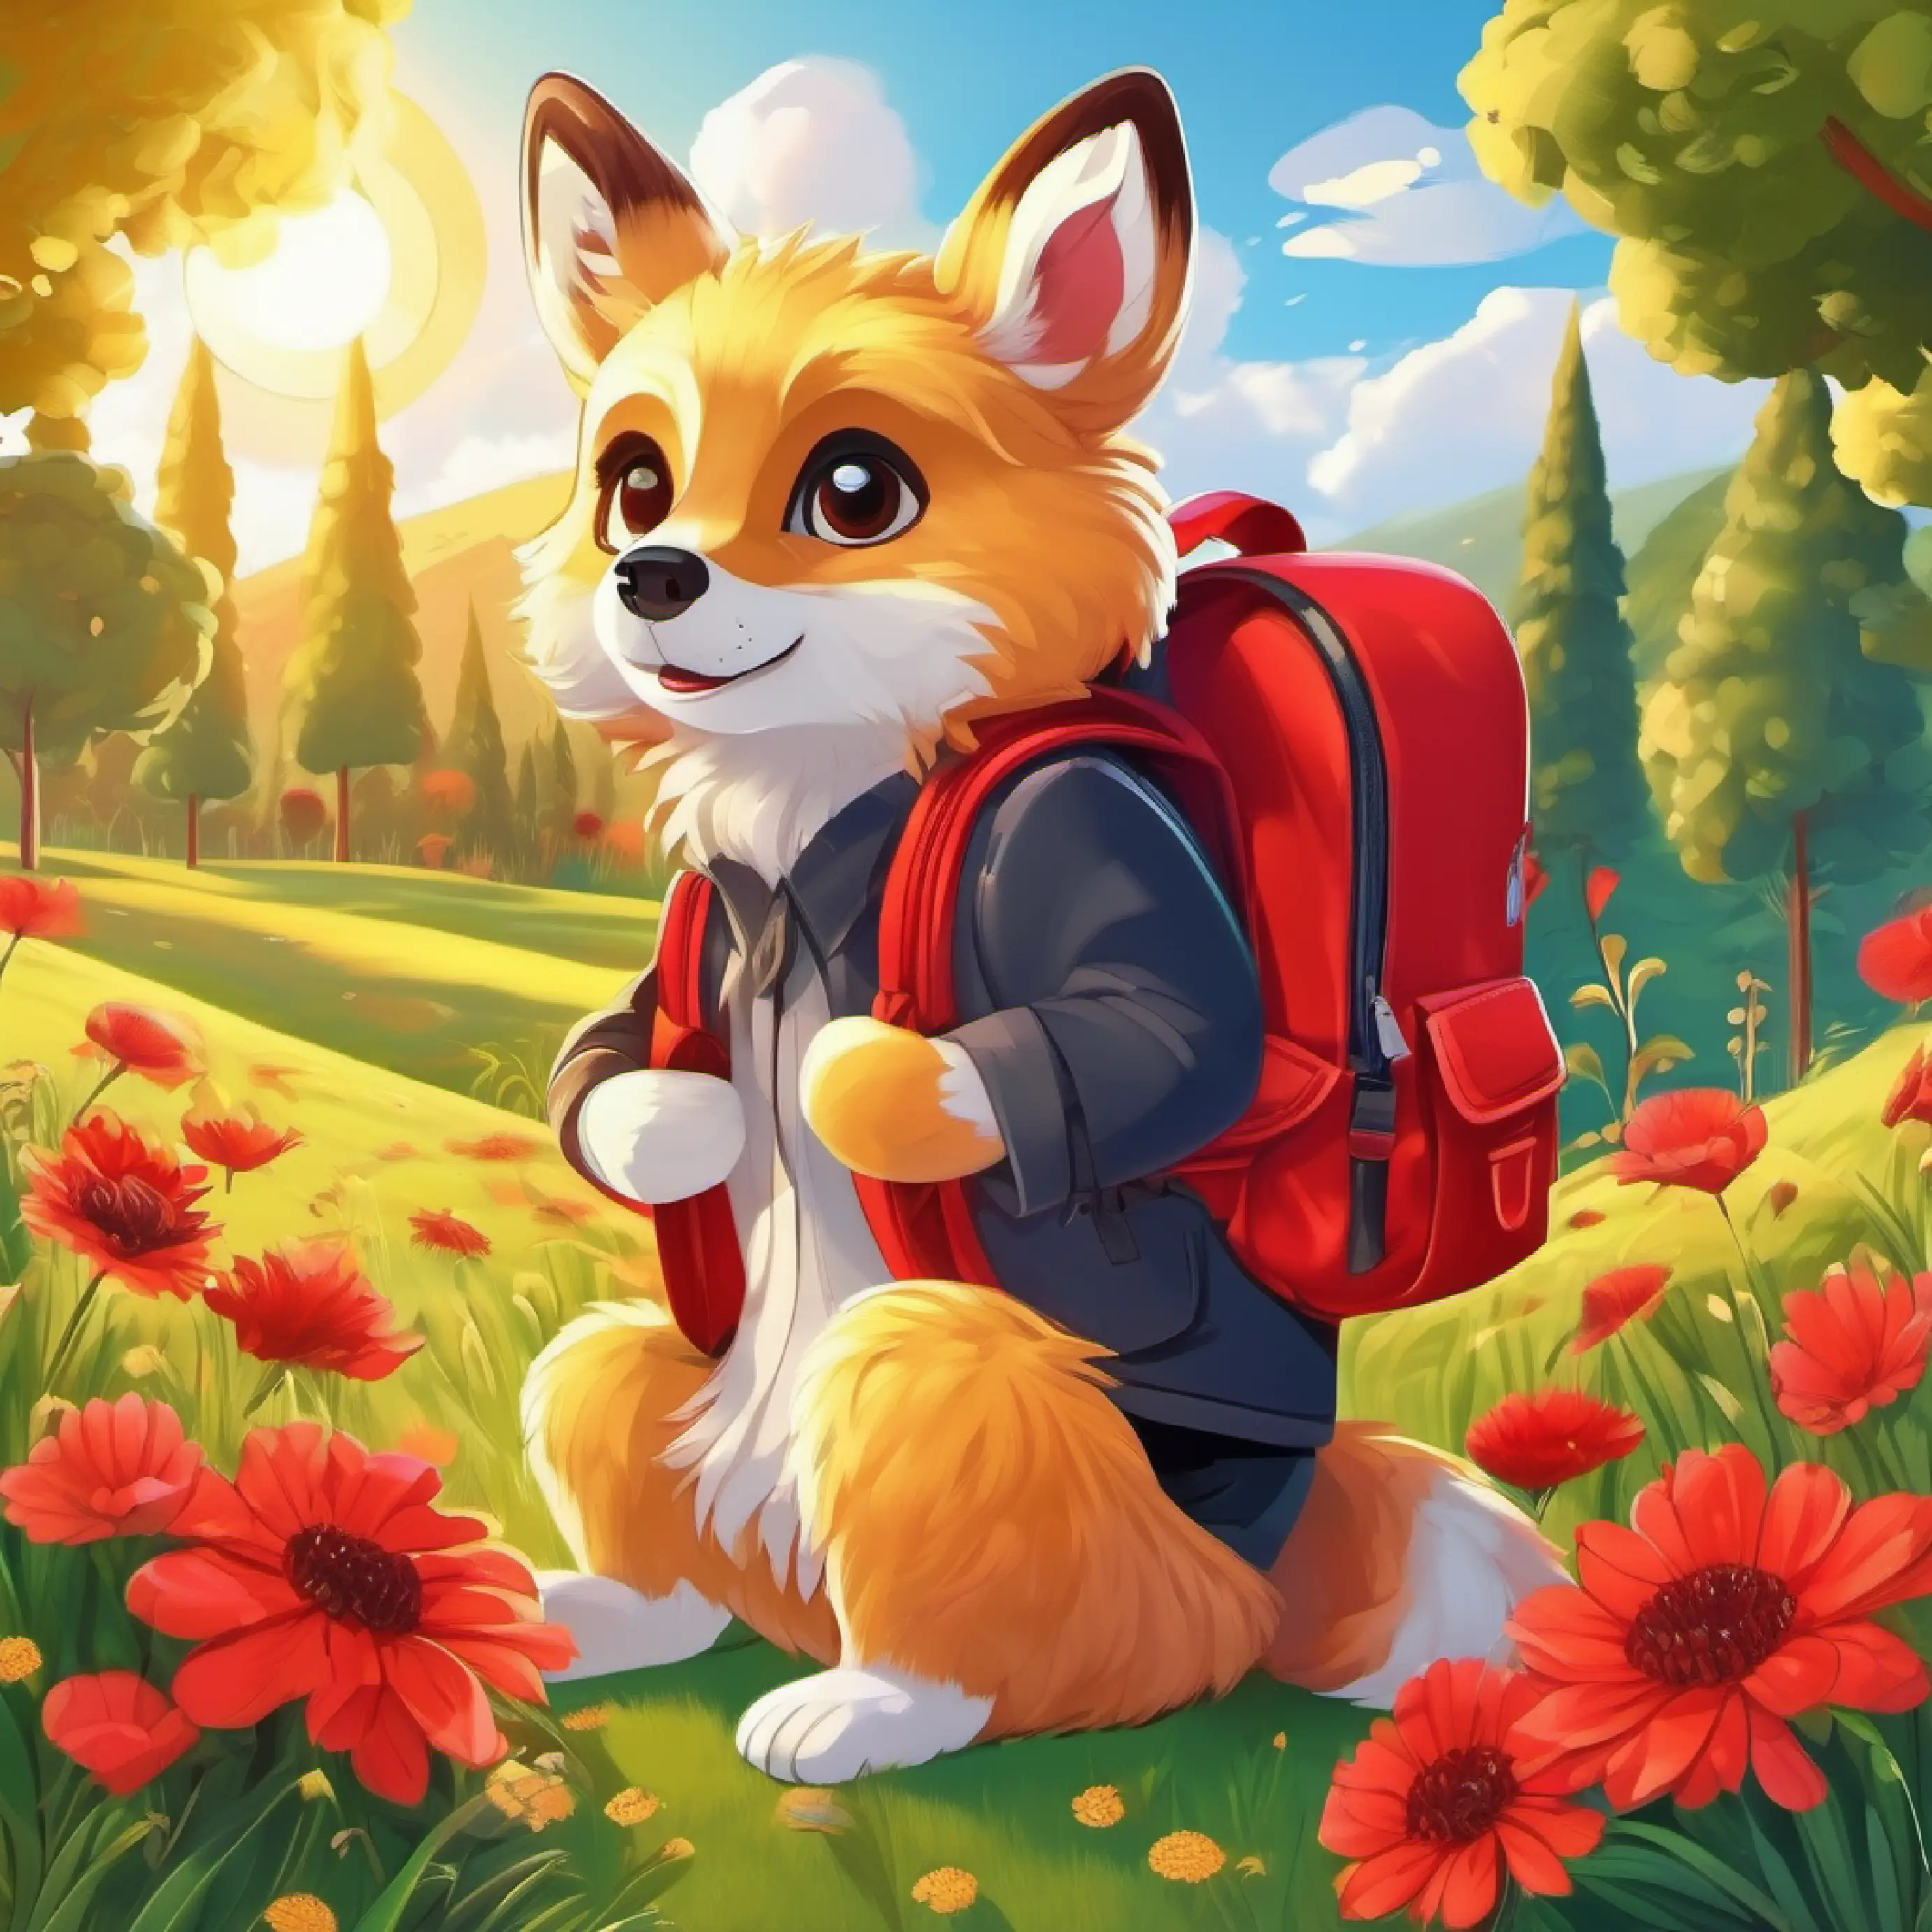 Golden fur, round black eyes, wearing a red backpack gets ready for school, setting is a sunny field.